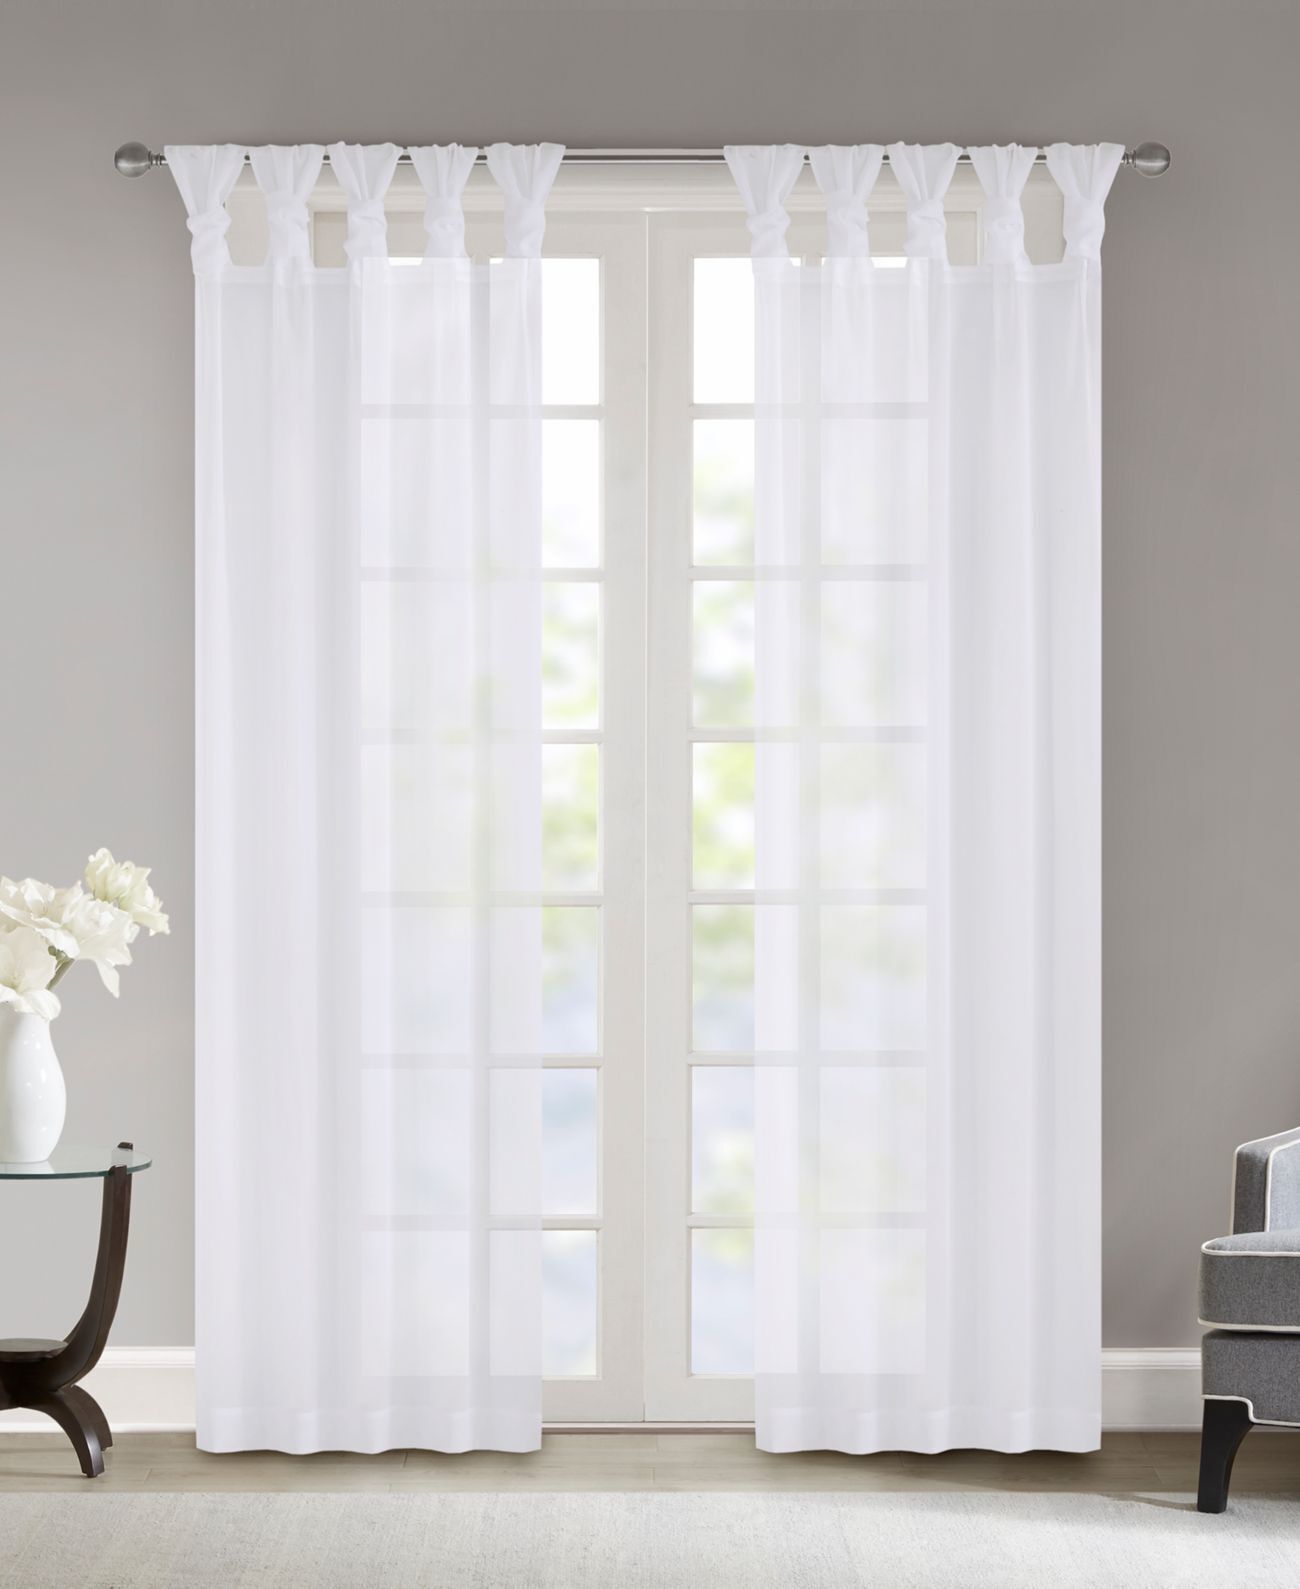 Madison Park Ceres 50″ x 84″ Twisted Tab Top Sheer Curtain Set, White - $27.71